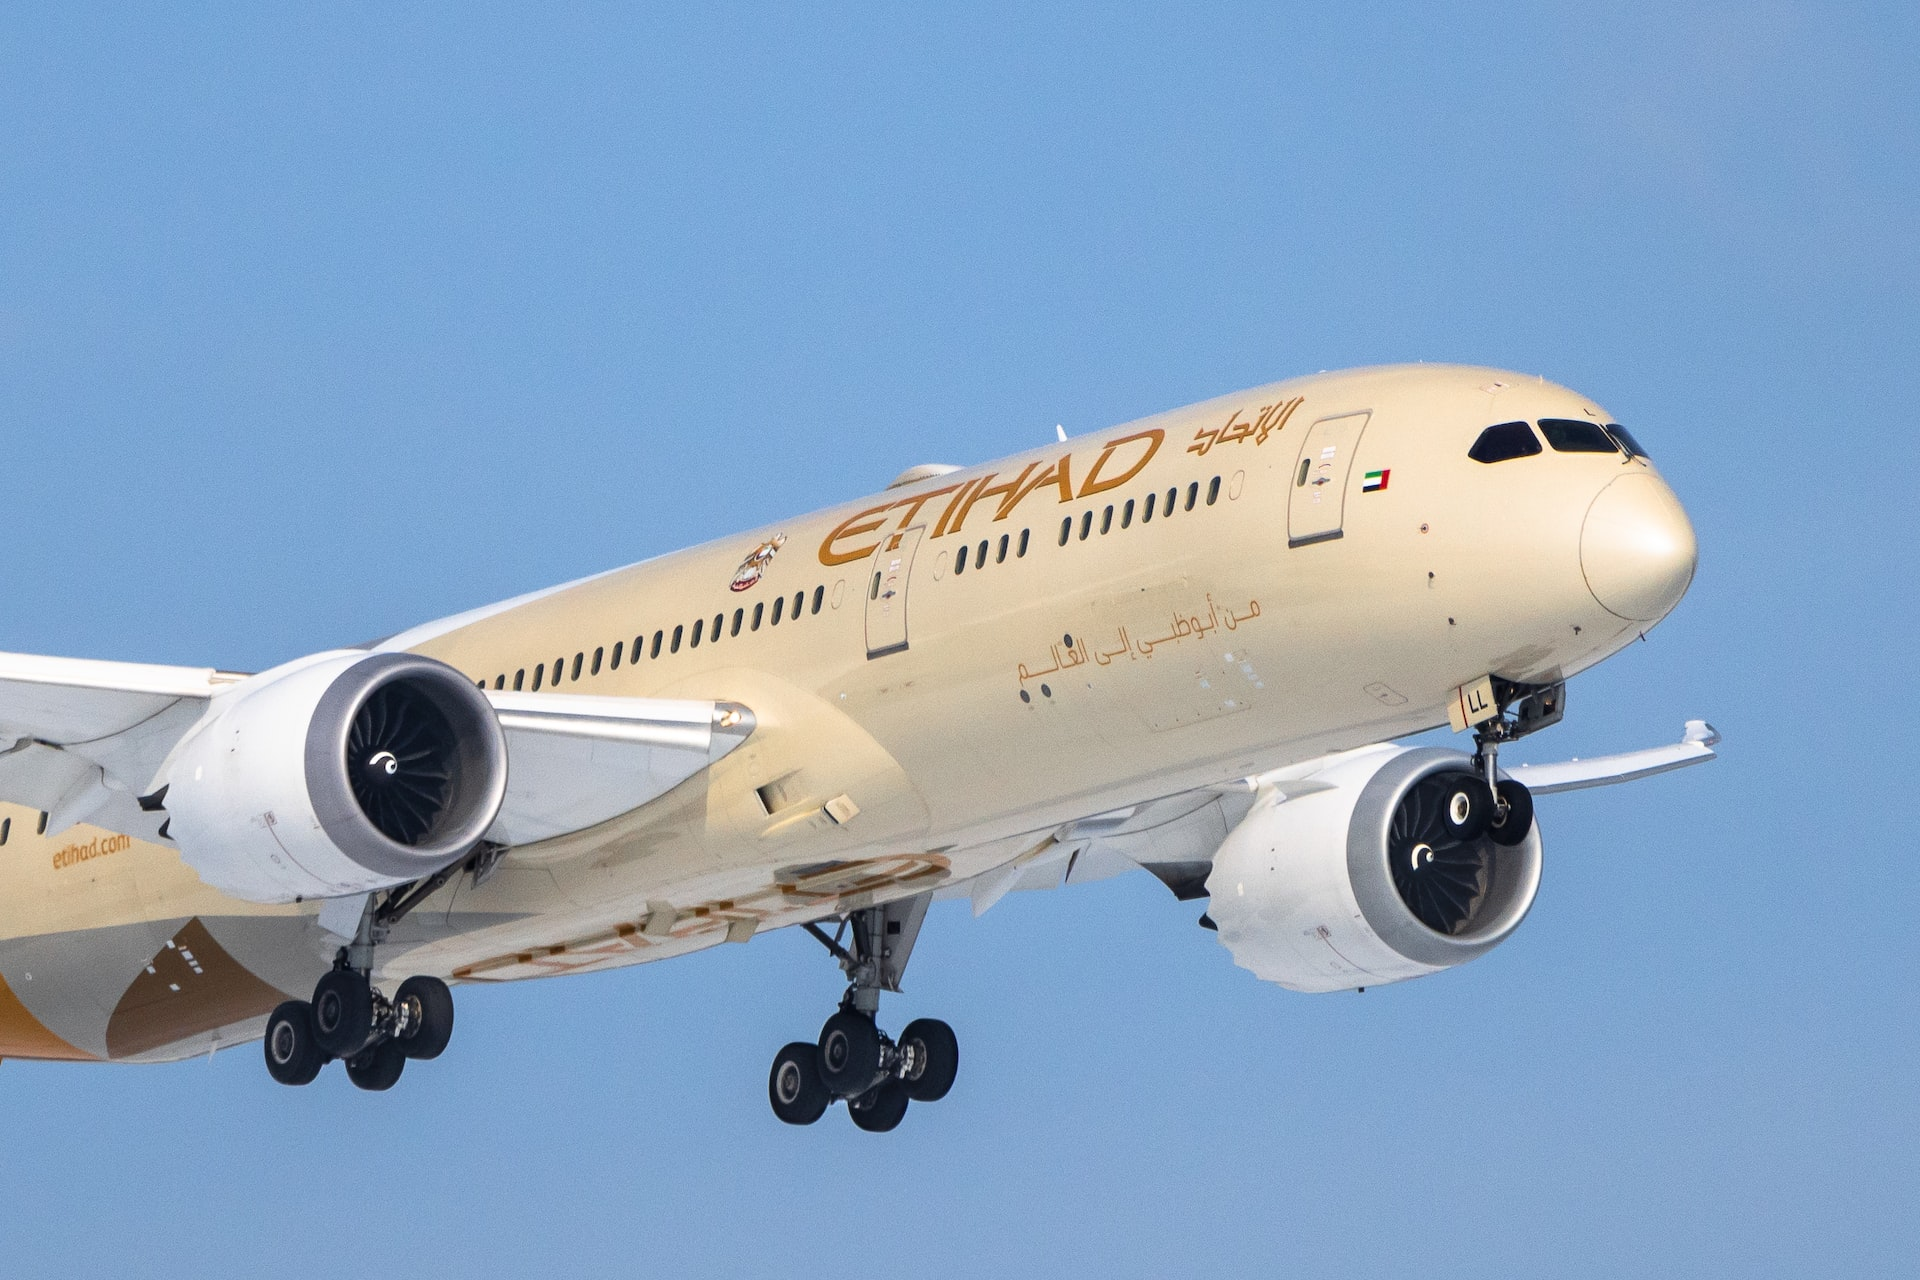 Etihad Airways aircraft in flight. Best airline to work for as a flight attendant.